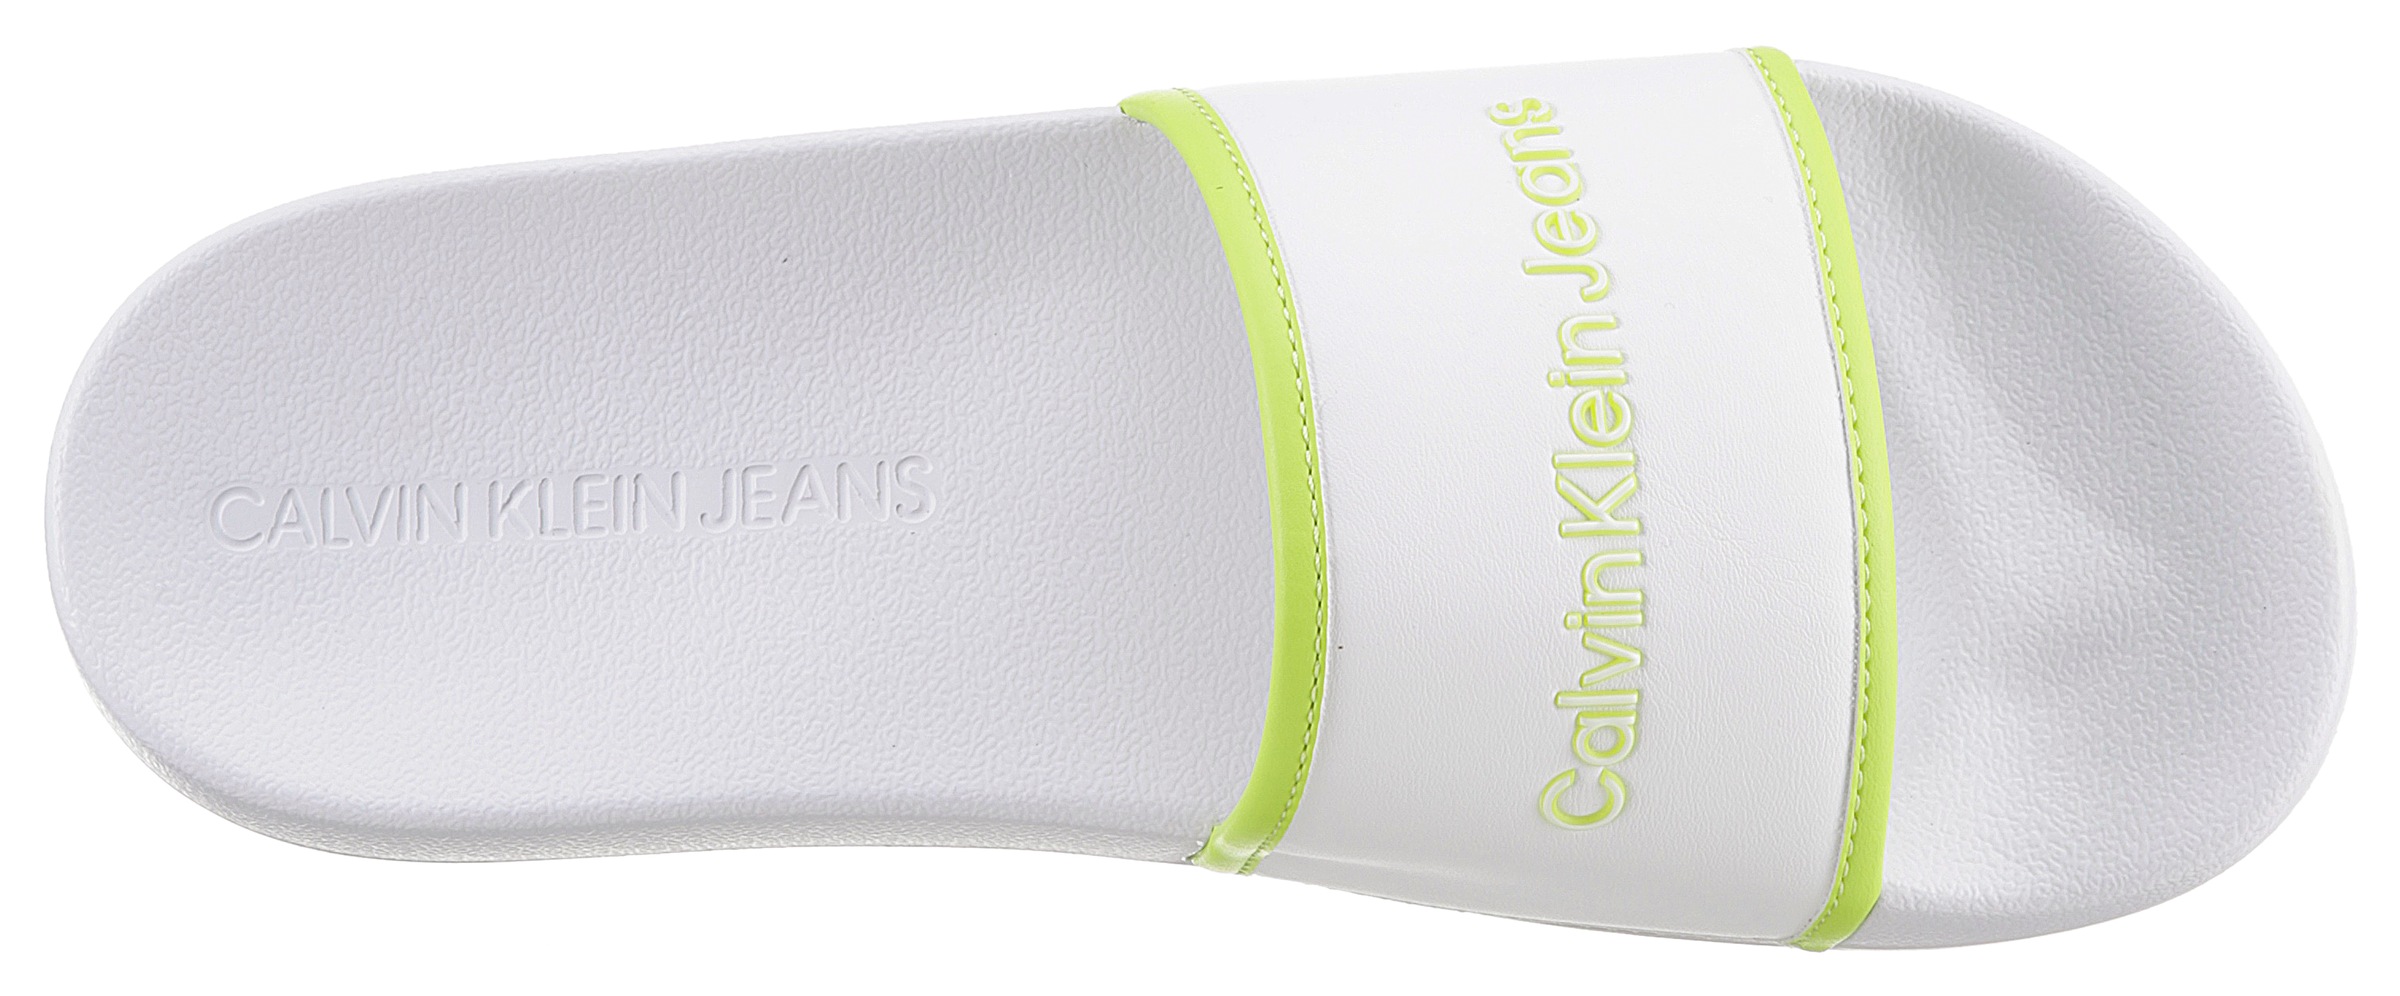 Calvin Klein Jeans Badepantolette »FANNY 5A *I«, in bequemer Form